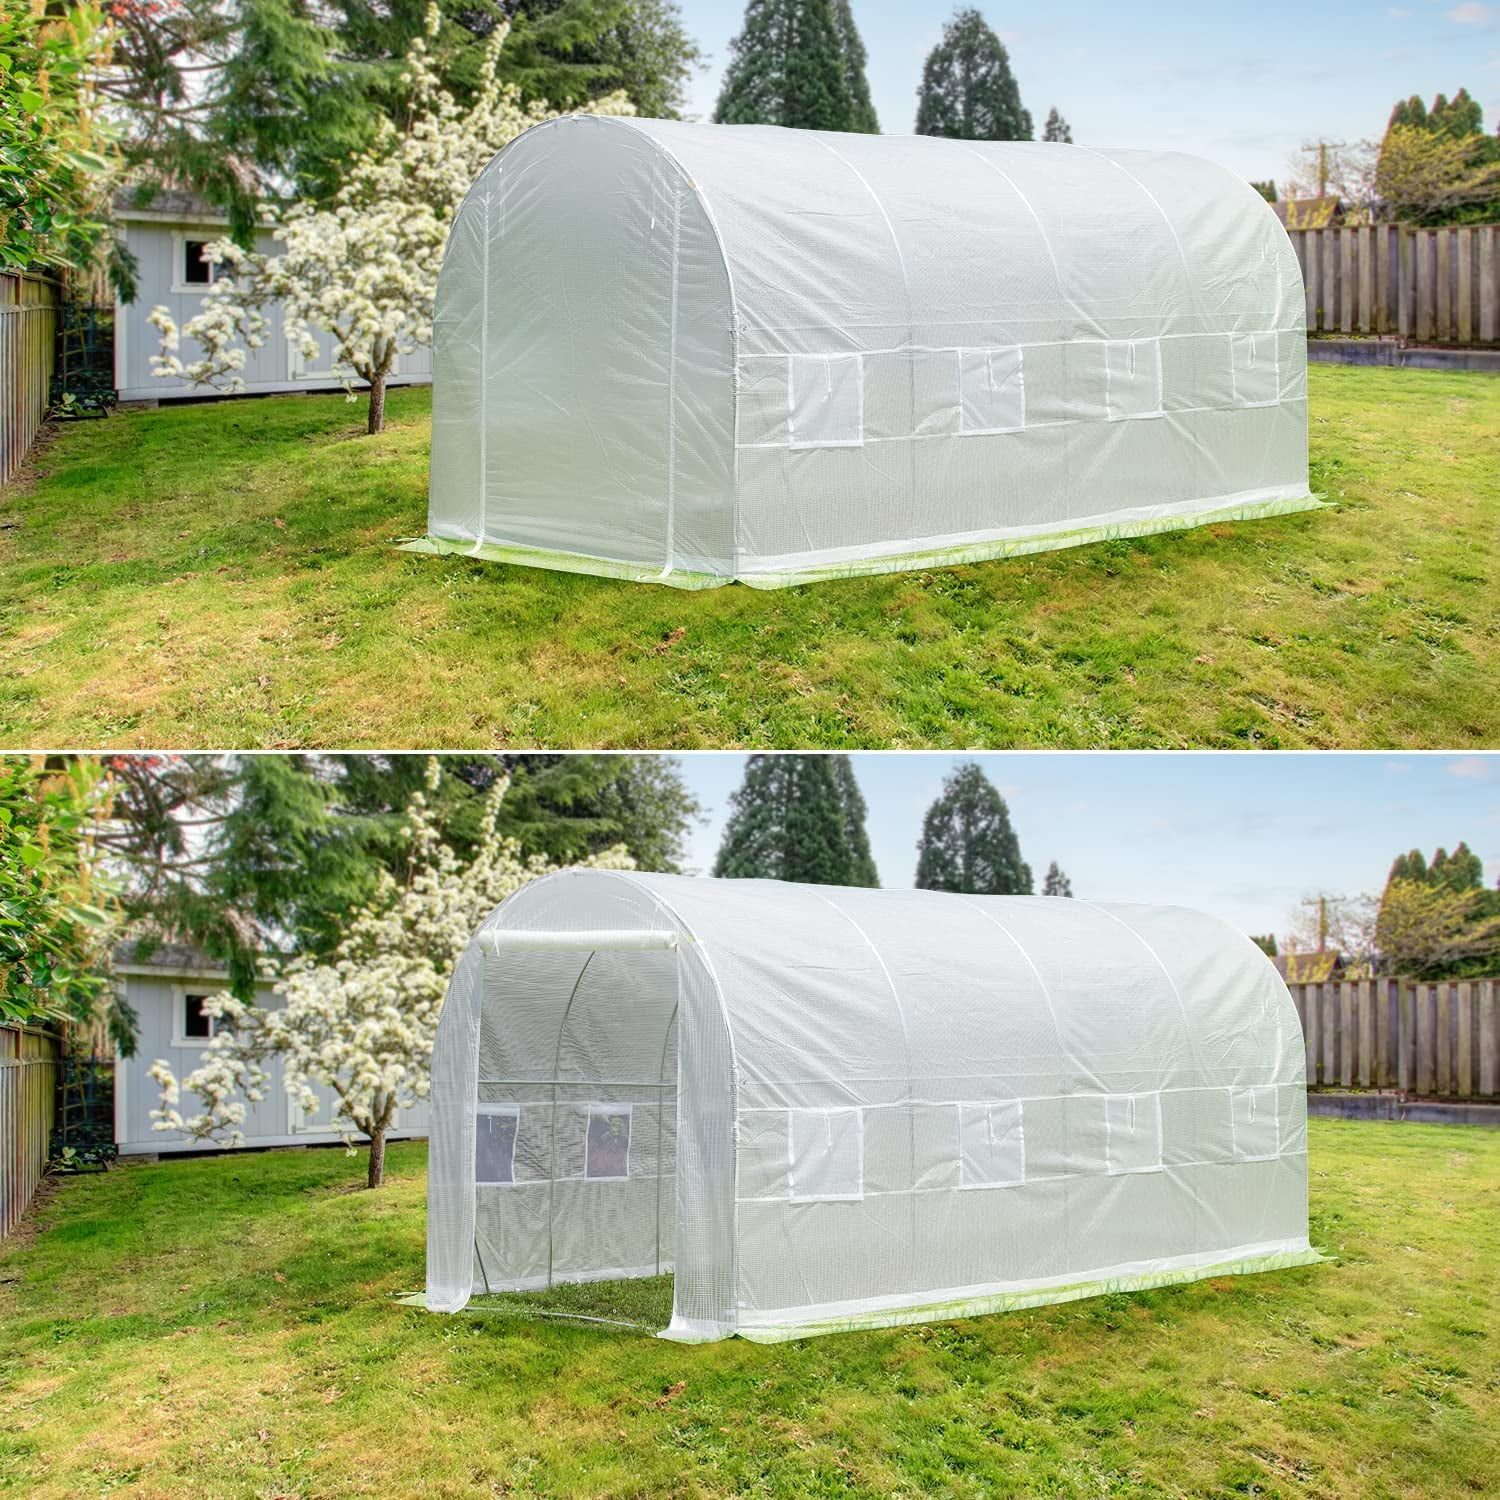 Upgraded Large Walk-in Greenhouse Green Tunnel Garden Plant Hot Green House for Outside Heavy Duty Winter Portable Greenhouse with Reinforced Frame&8 Screen Windows EROMMY 15'×6.6'×6.6' Greenhouse 